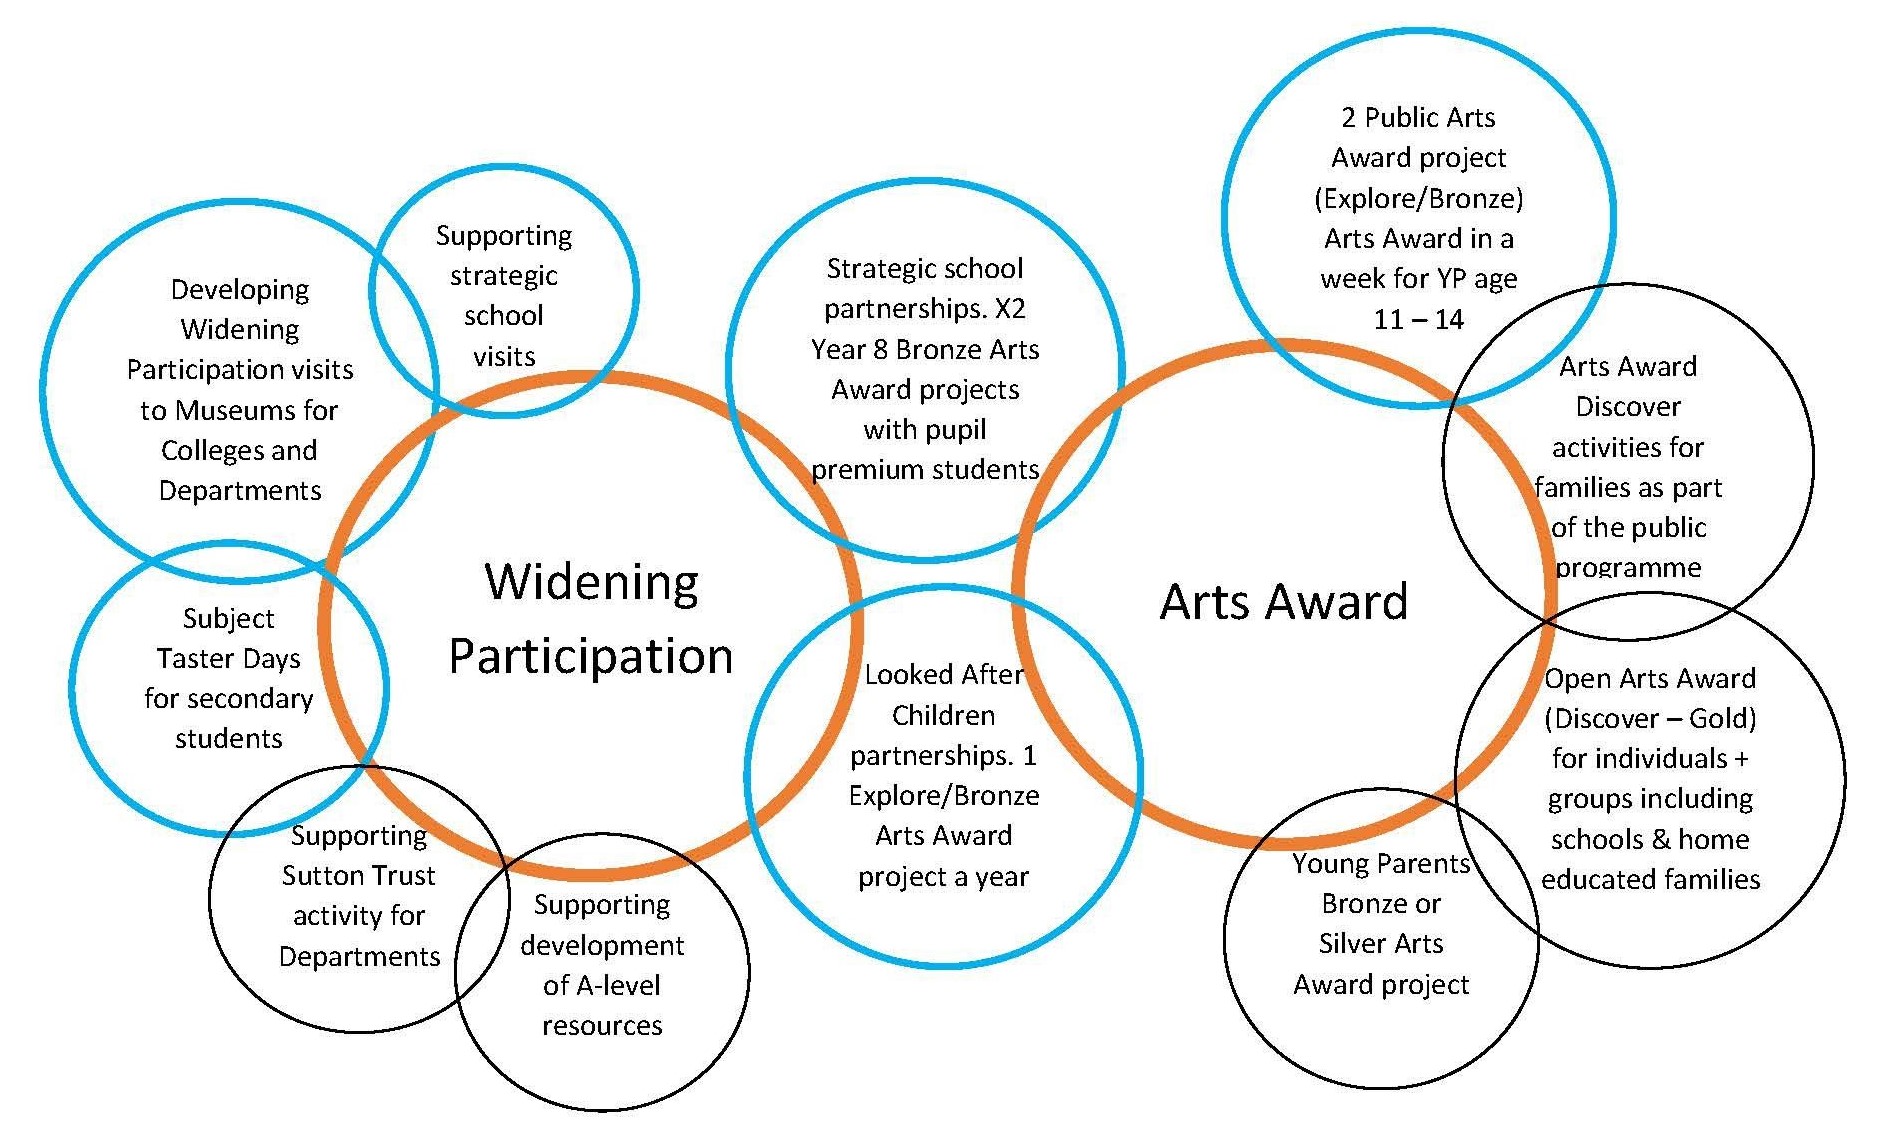 Range of different activities within the programme